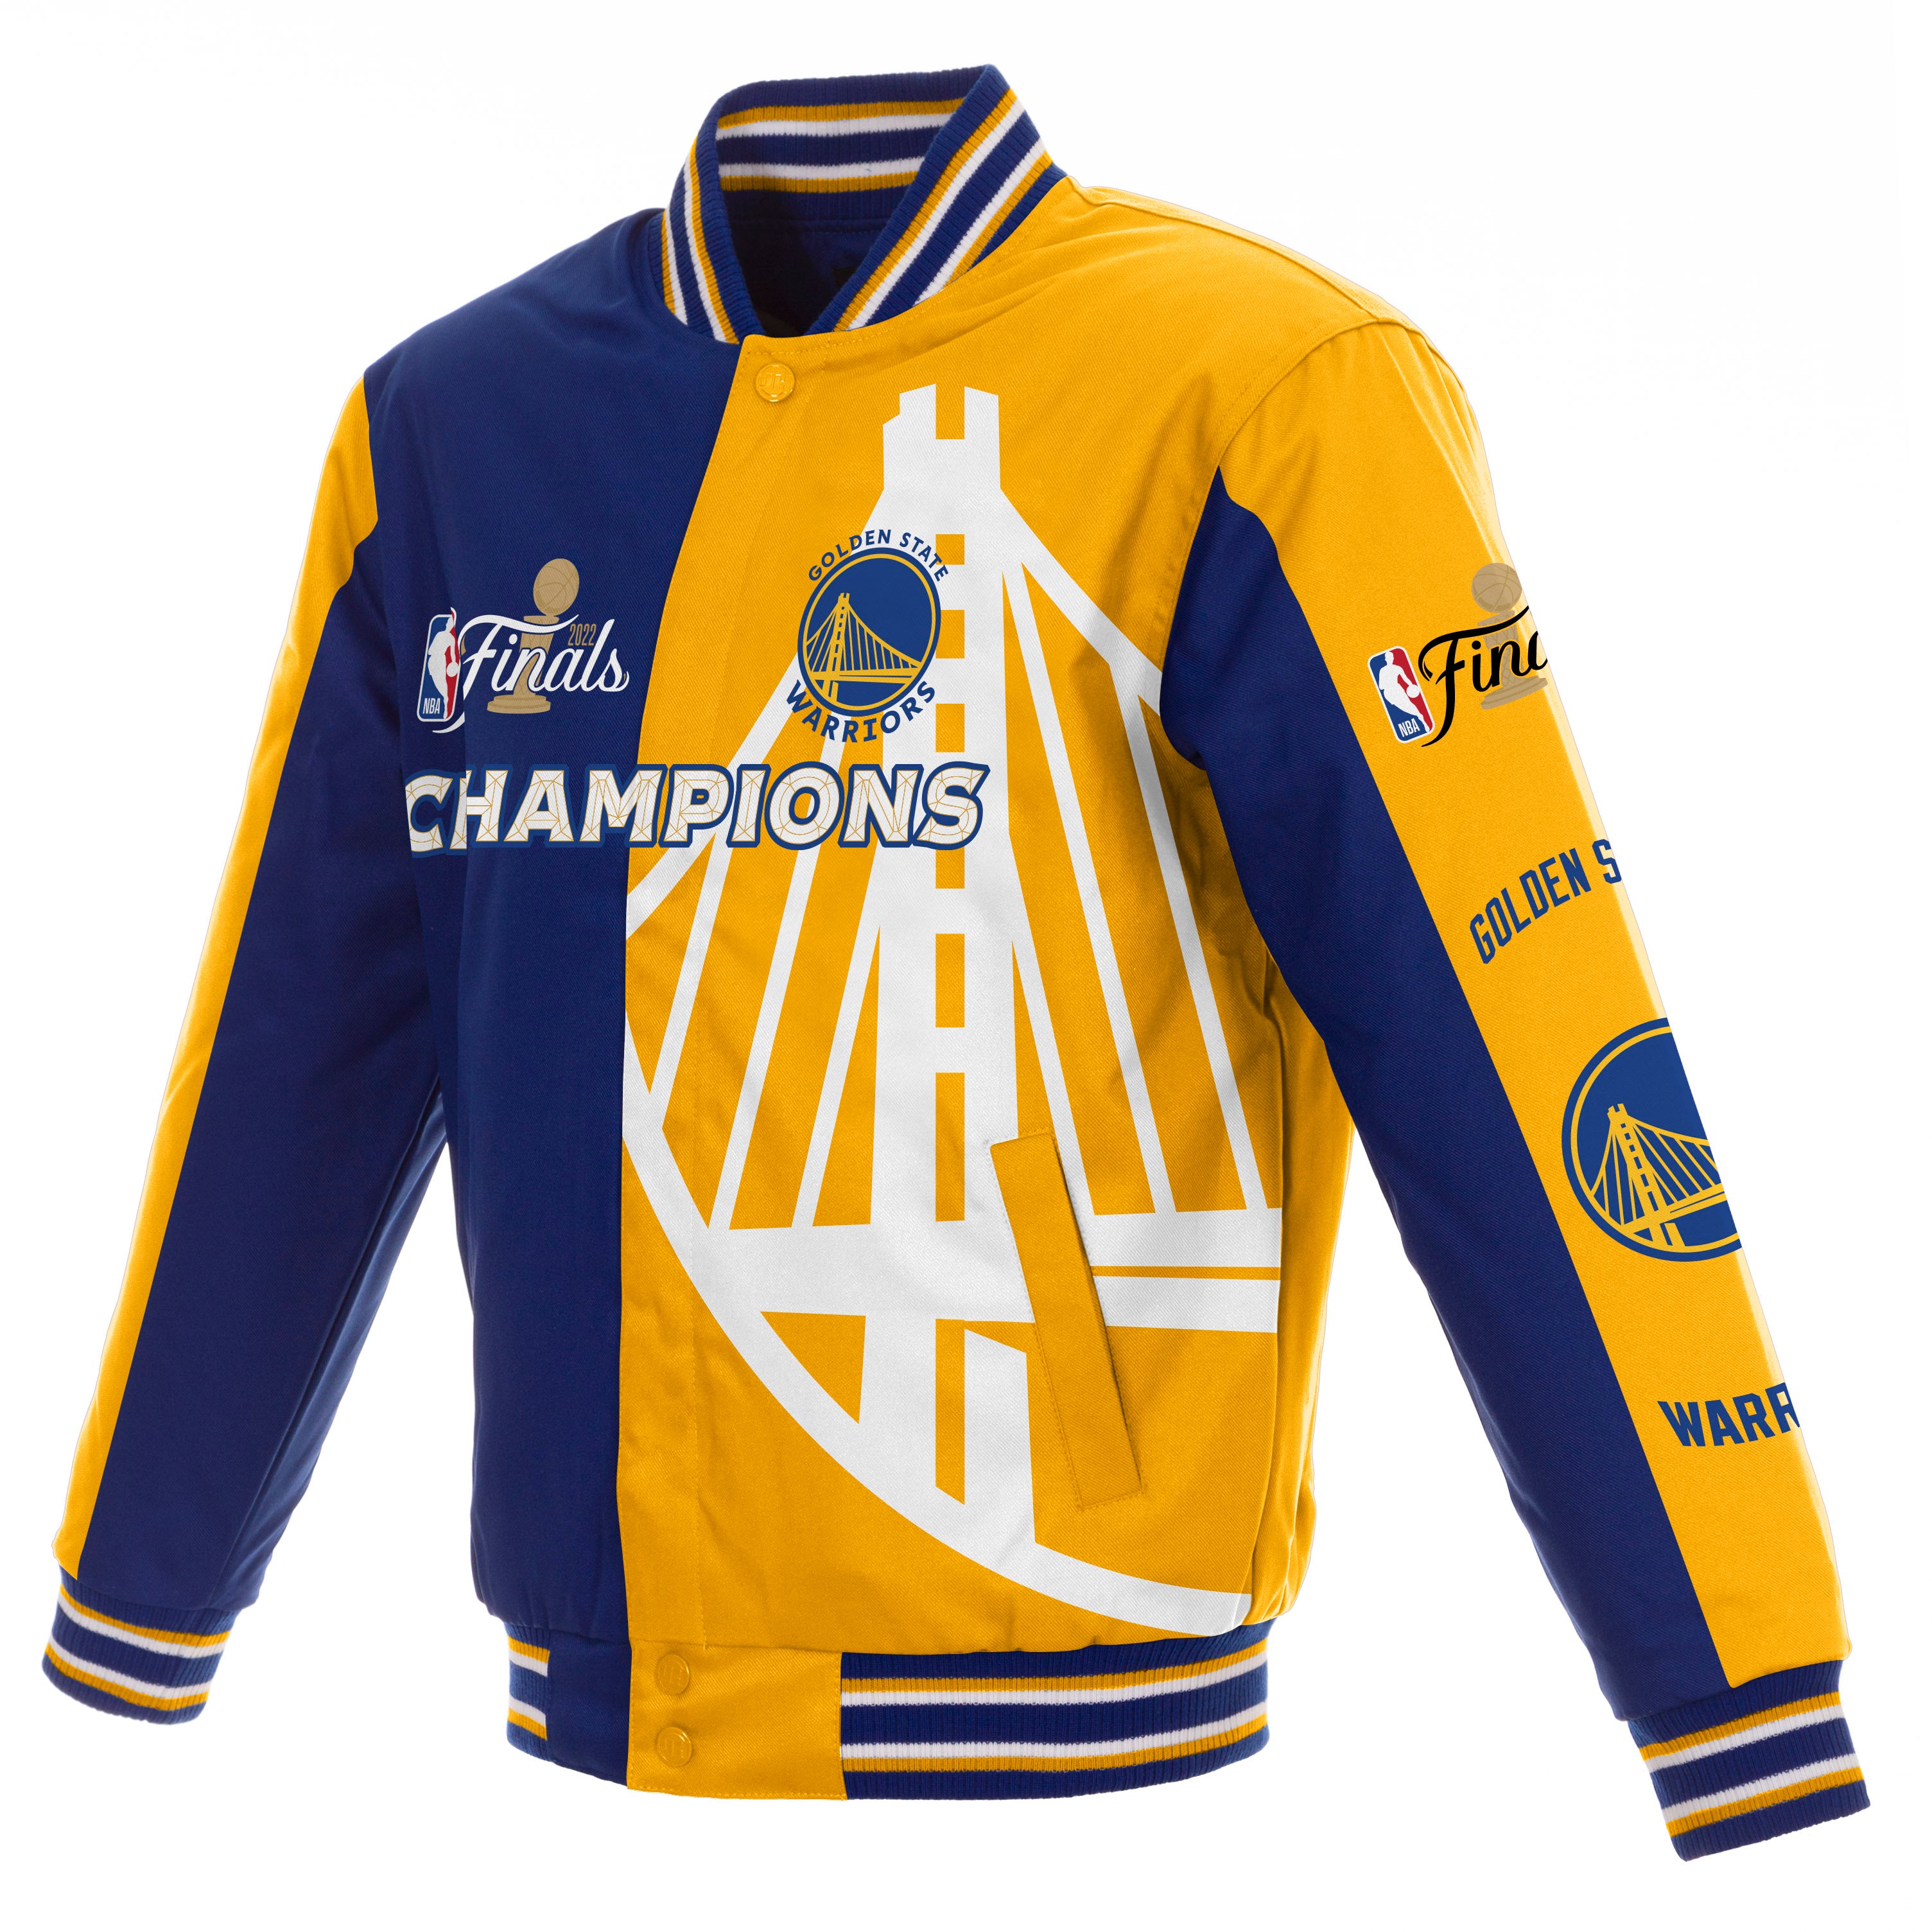 Lakers Jacket Los Angeles 17 Time NBA FINALS Championship Cotton